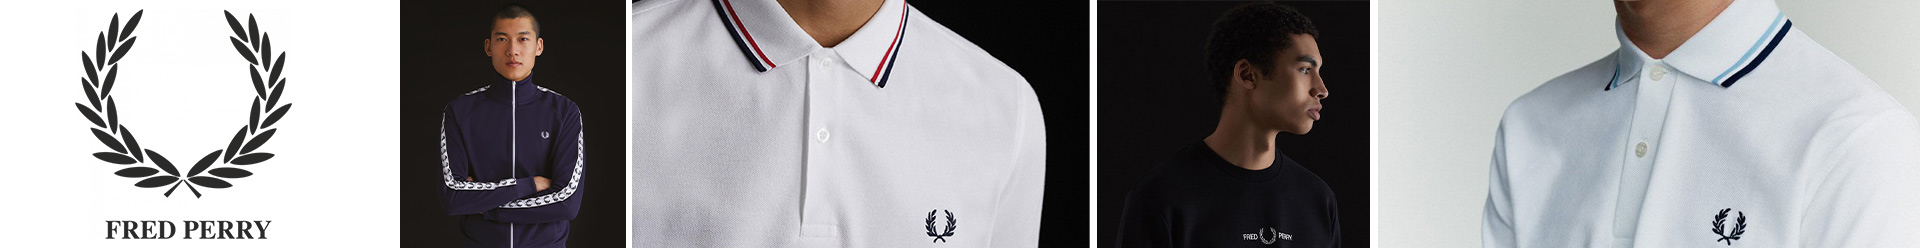 Fred Perry Tennis